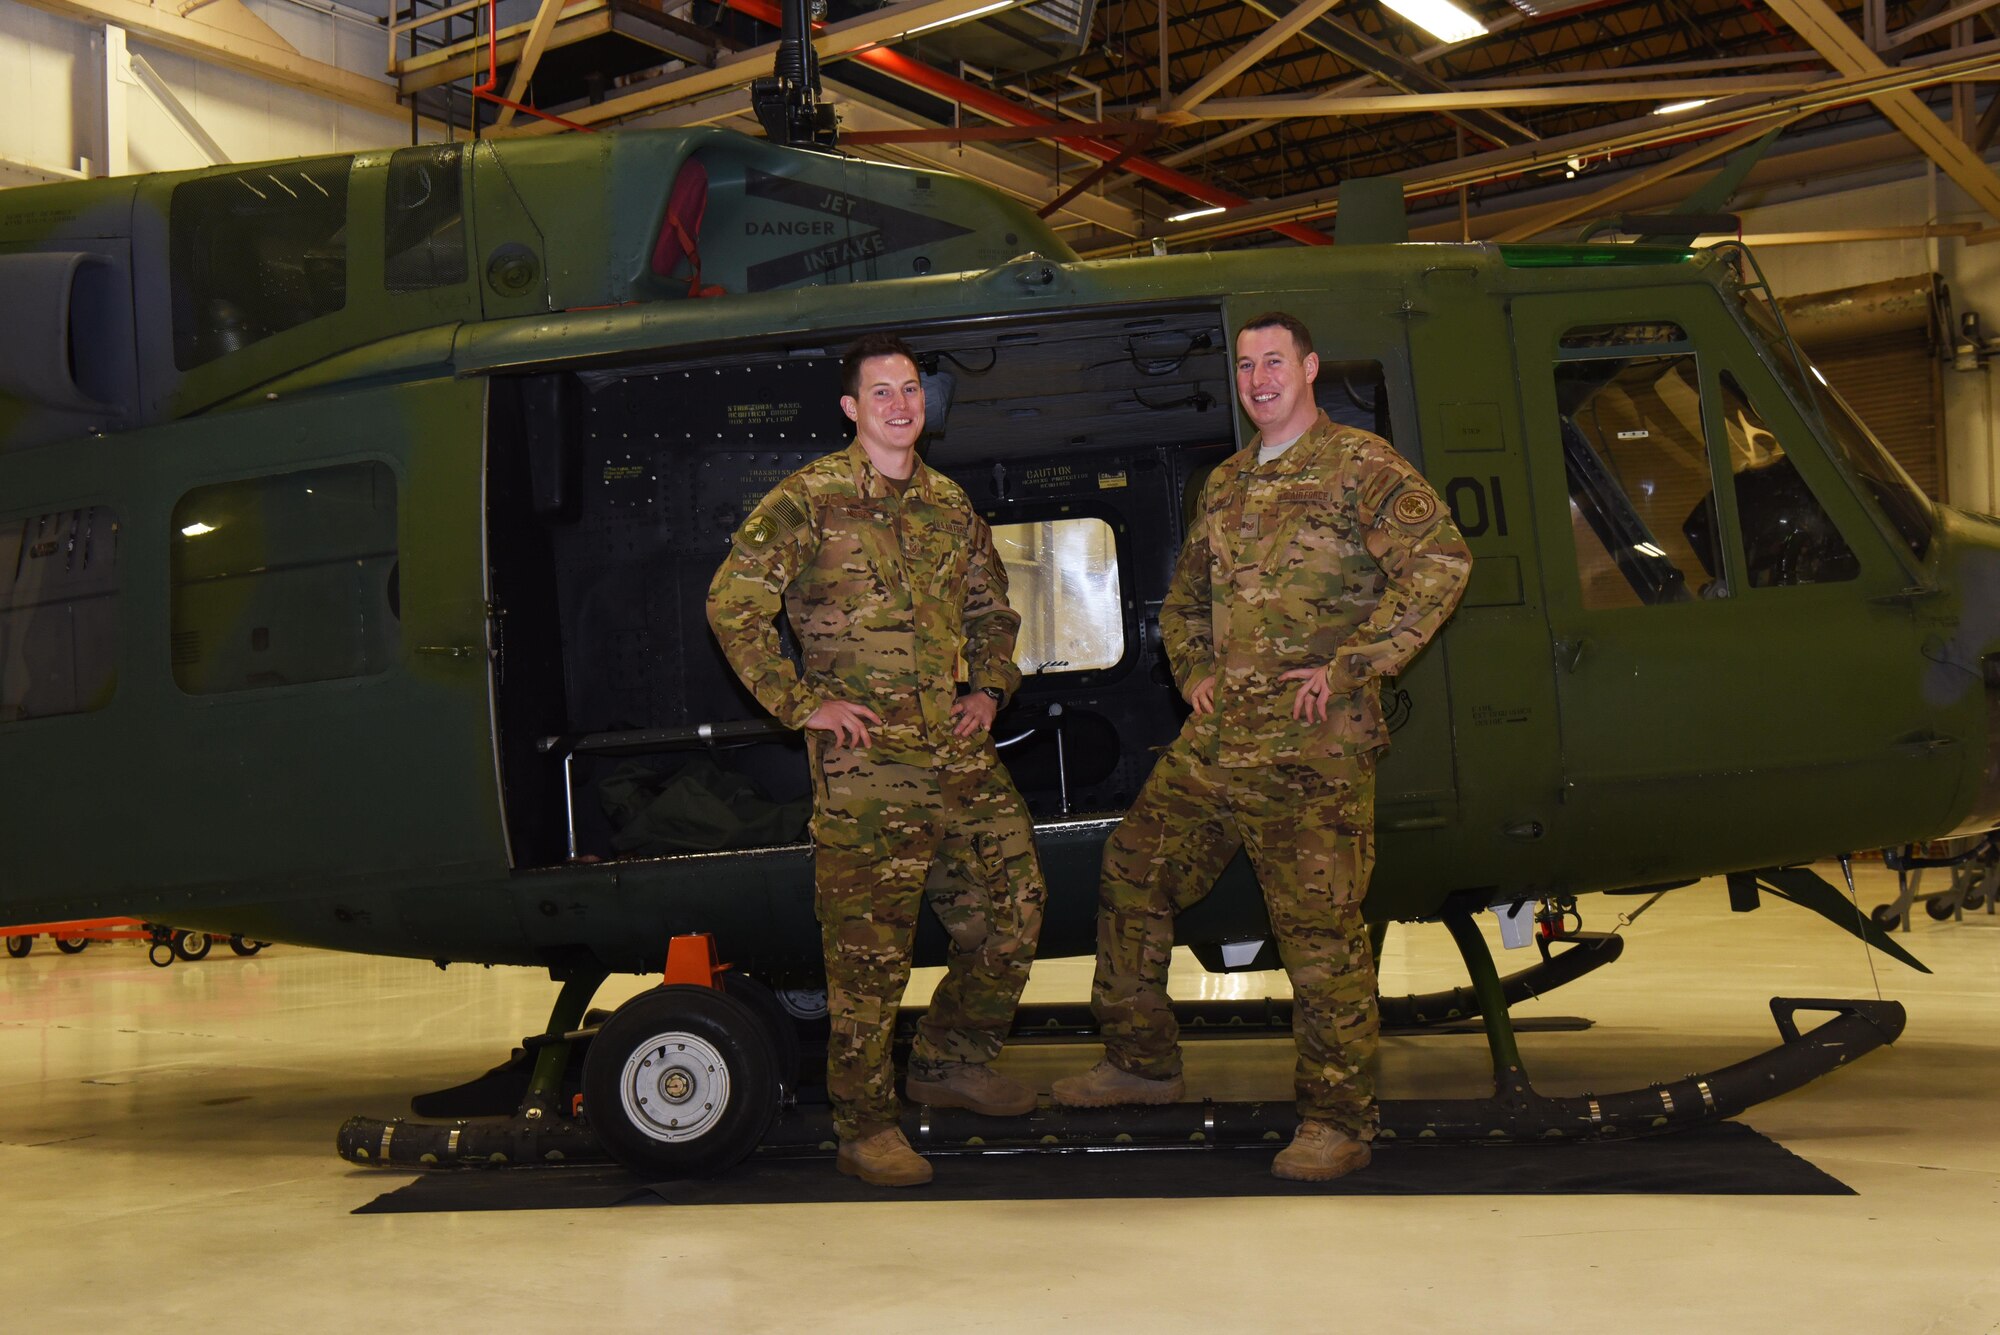 Tech. Sgt. Justin Nissen and Staff Sgt. Timothy Nissen, 37th Helicopter Squadron UH-1N helicopter flight engineers, pose next to a helicopter at F.E. Warren Air Force Base, Wyo., Dec. 12, 2016. After four years of trying, the brothers managed to get stationed together in the same unit. (U.S. Air Force photo by Airman 1st Class Breanna Carter)